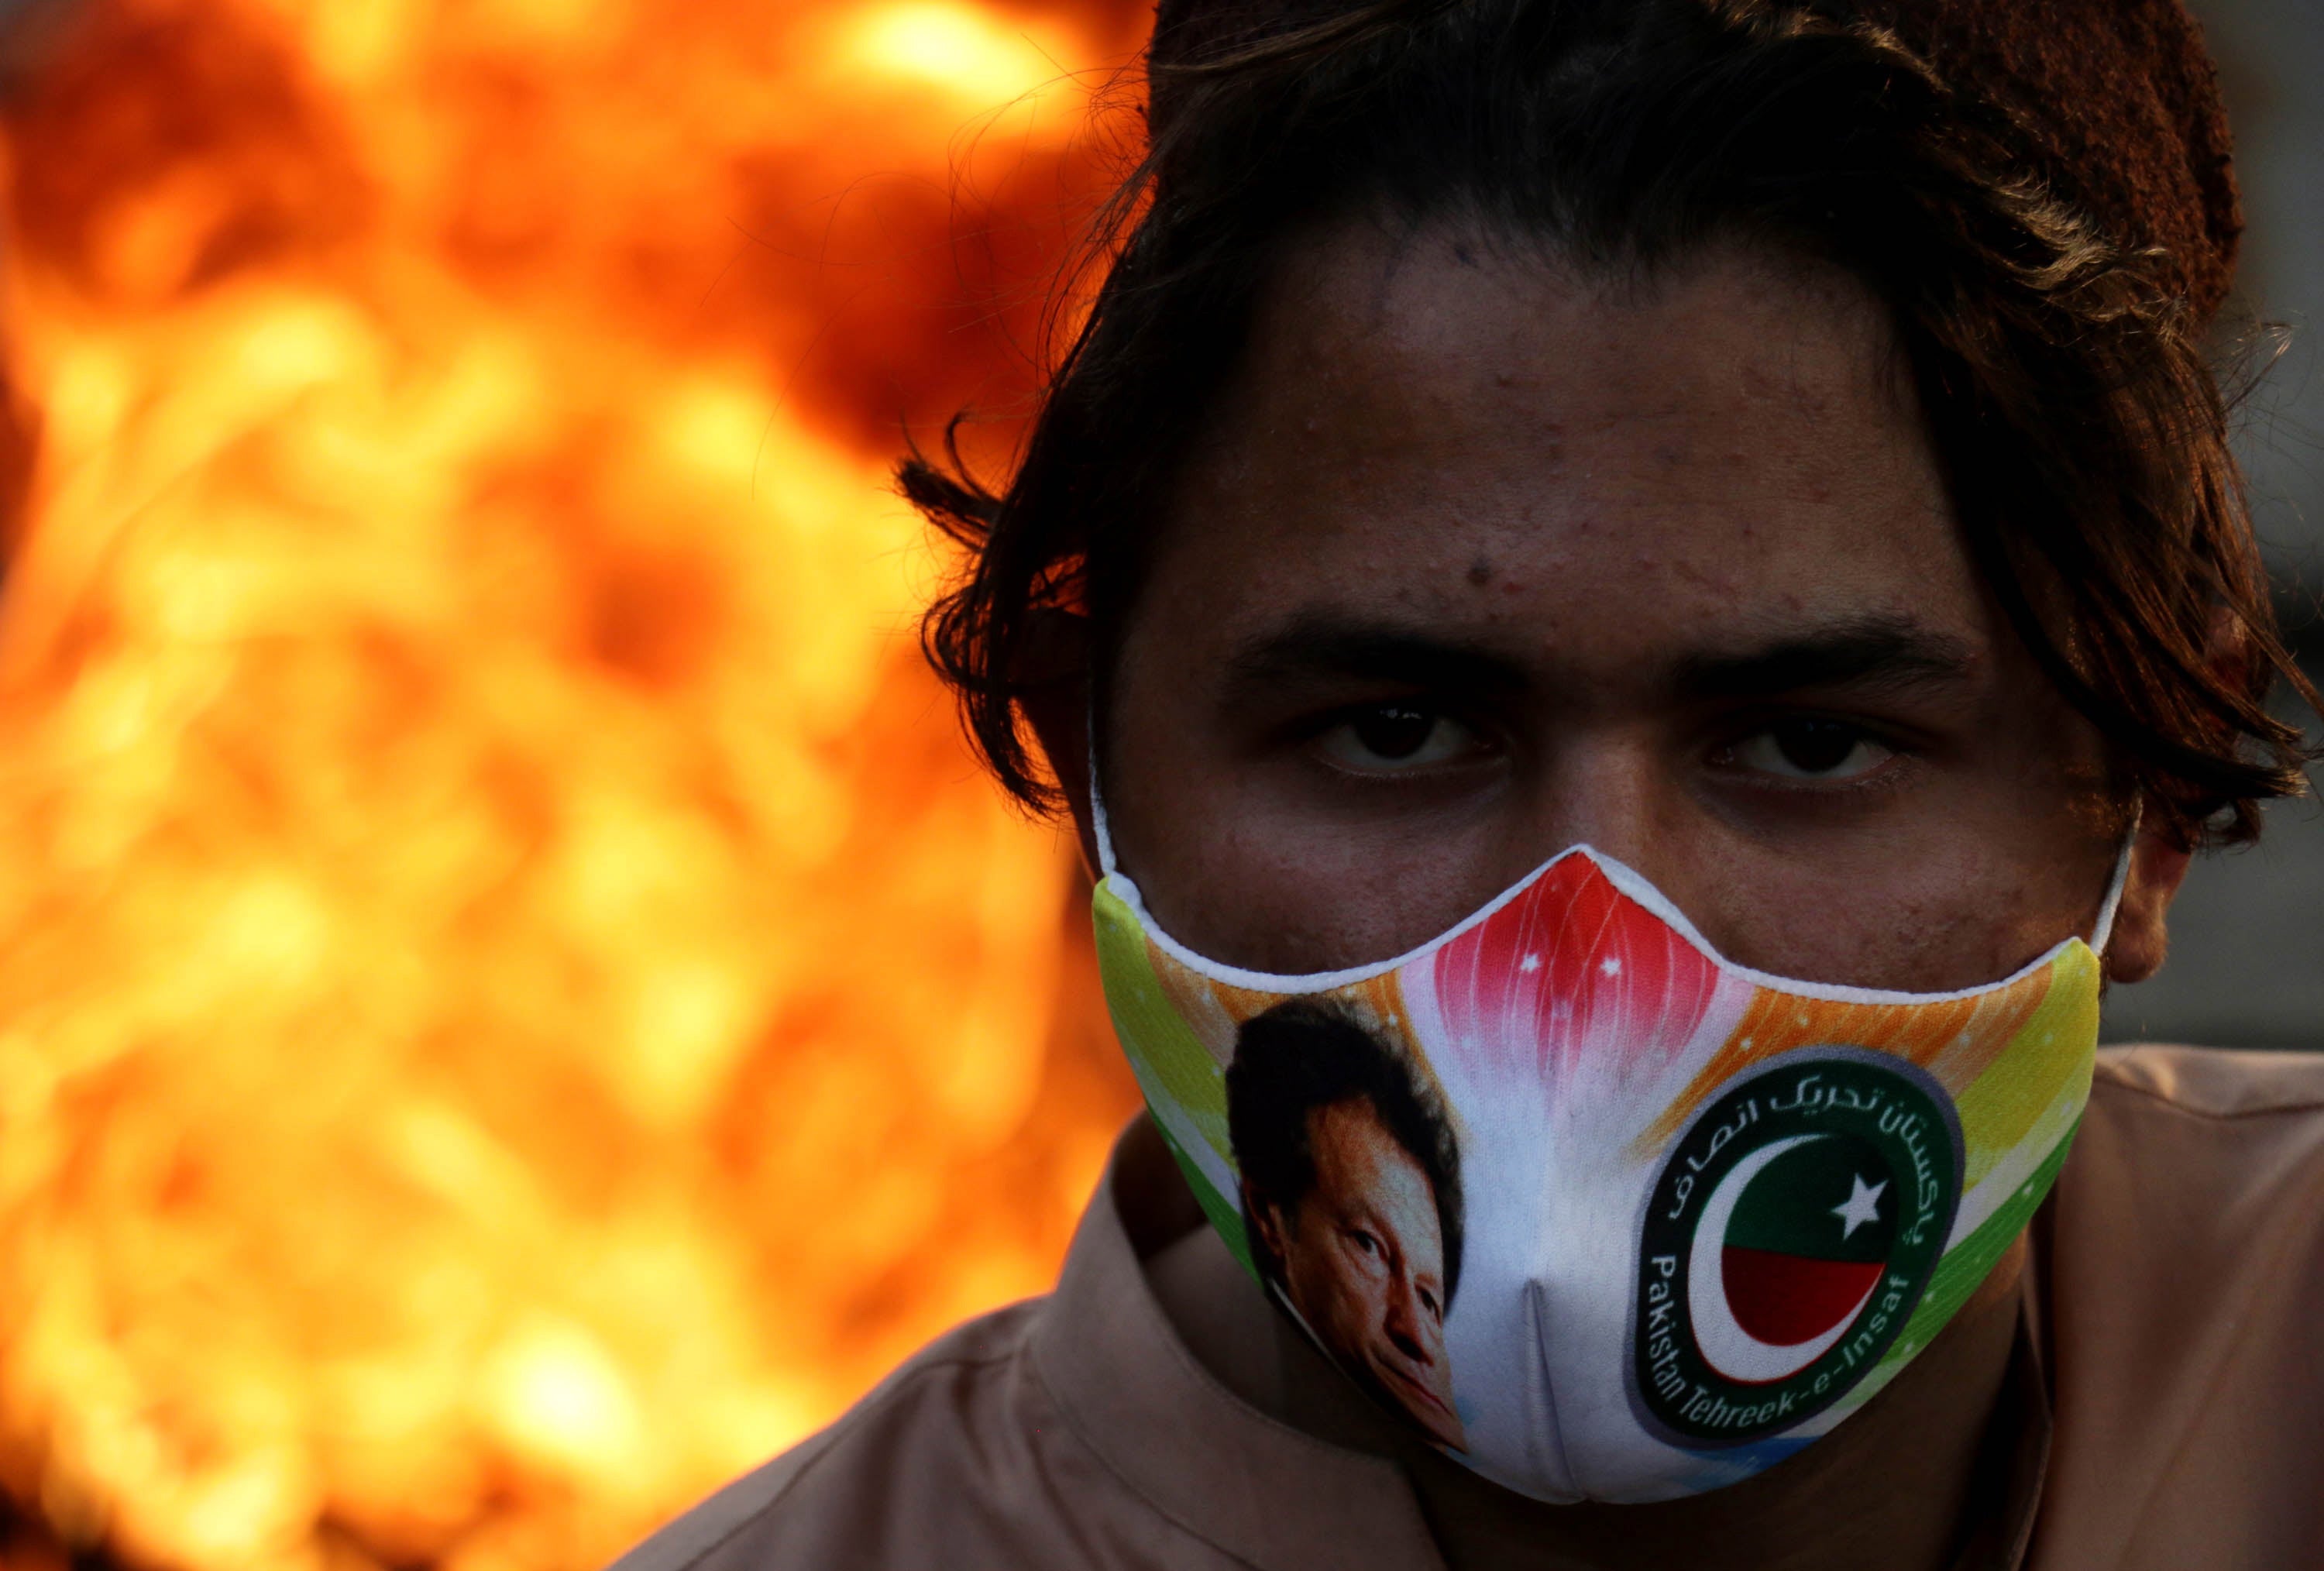 A supporter of Imran Khan during a protest following the attack on the former prime minister, in Rawalpindi, Pakistan, 7 November